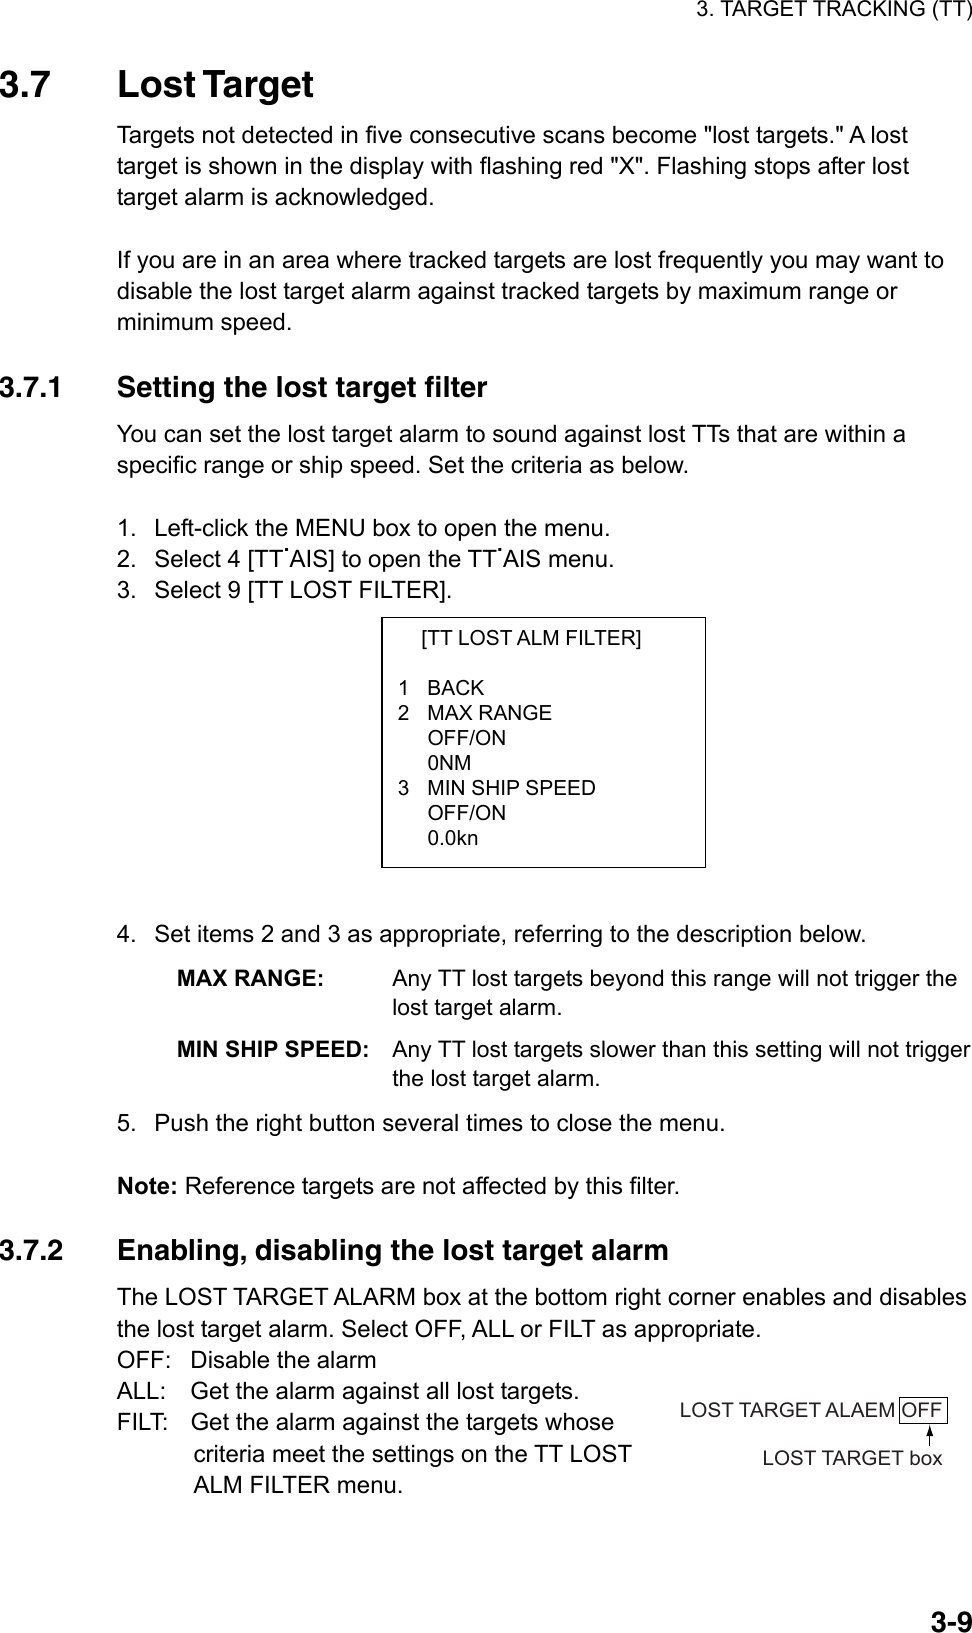 3. TARGET TRACKING (TT)  3-9  [TT LOST ALM FILTER]  1 BACK 2 MAX RANGE  OFF/ON  0NM 3  MIN SHIP SPEED  OFF/ON  0.0kn 3.7 Lost Target Targets not detected in five consecutive scans become &quot;lost targets.&quot; A lost target is shown in the display with flashing red &quot;X&quot;. Flashing stops after lost target alarm is acknowledged.  If you are in an area where tracked targets are lost frequently you may want to disable the lost target alarm against tracked targets by maximum range or minimum speed.  3.7.1  Setting the lost target filter You can set the lost target alarm to sound against lost TTs that are within a specific range or ship speed. Set the criteria as below.  1.  Left-click the MENU box to open the menu. 2.  Select 4 [TT.AIS] to open the TT.AIS menu. 3.  Select 9 [TT LOST FILTER].           4.  Set items 2 and 3 as appropriate, referring to the description below. MAX RANGE:  Any TT lost targets beyond this range will not trigger the lost target alarm. MIN SHIP SPEED: Any TT lost targets slower than this setting will not trigger the lost target alarm. 5.  Push the right button several times to close the menu.  Note: Reference targets are not affected by this filter.  3.7.2  Enabling, disabling the lost target alarm The LOST TARGET ALARM box at the bottom right corner enables and disables the lost target alarm. Select OFF, ALL or FILT as appropriate. OFF: Disable the alarm ALL:  Get the alarm against all lost targets. FILT:  Get the alarm against the targets whose criteria meet the settings on the TT LOST ALM FILTER menu.  LOST TARGET ALAEM OFFLOST TARGET box